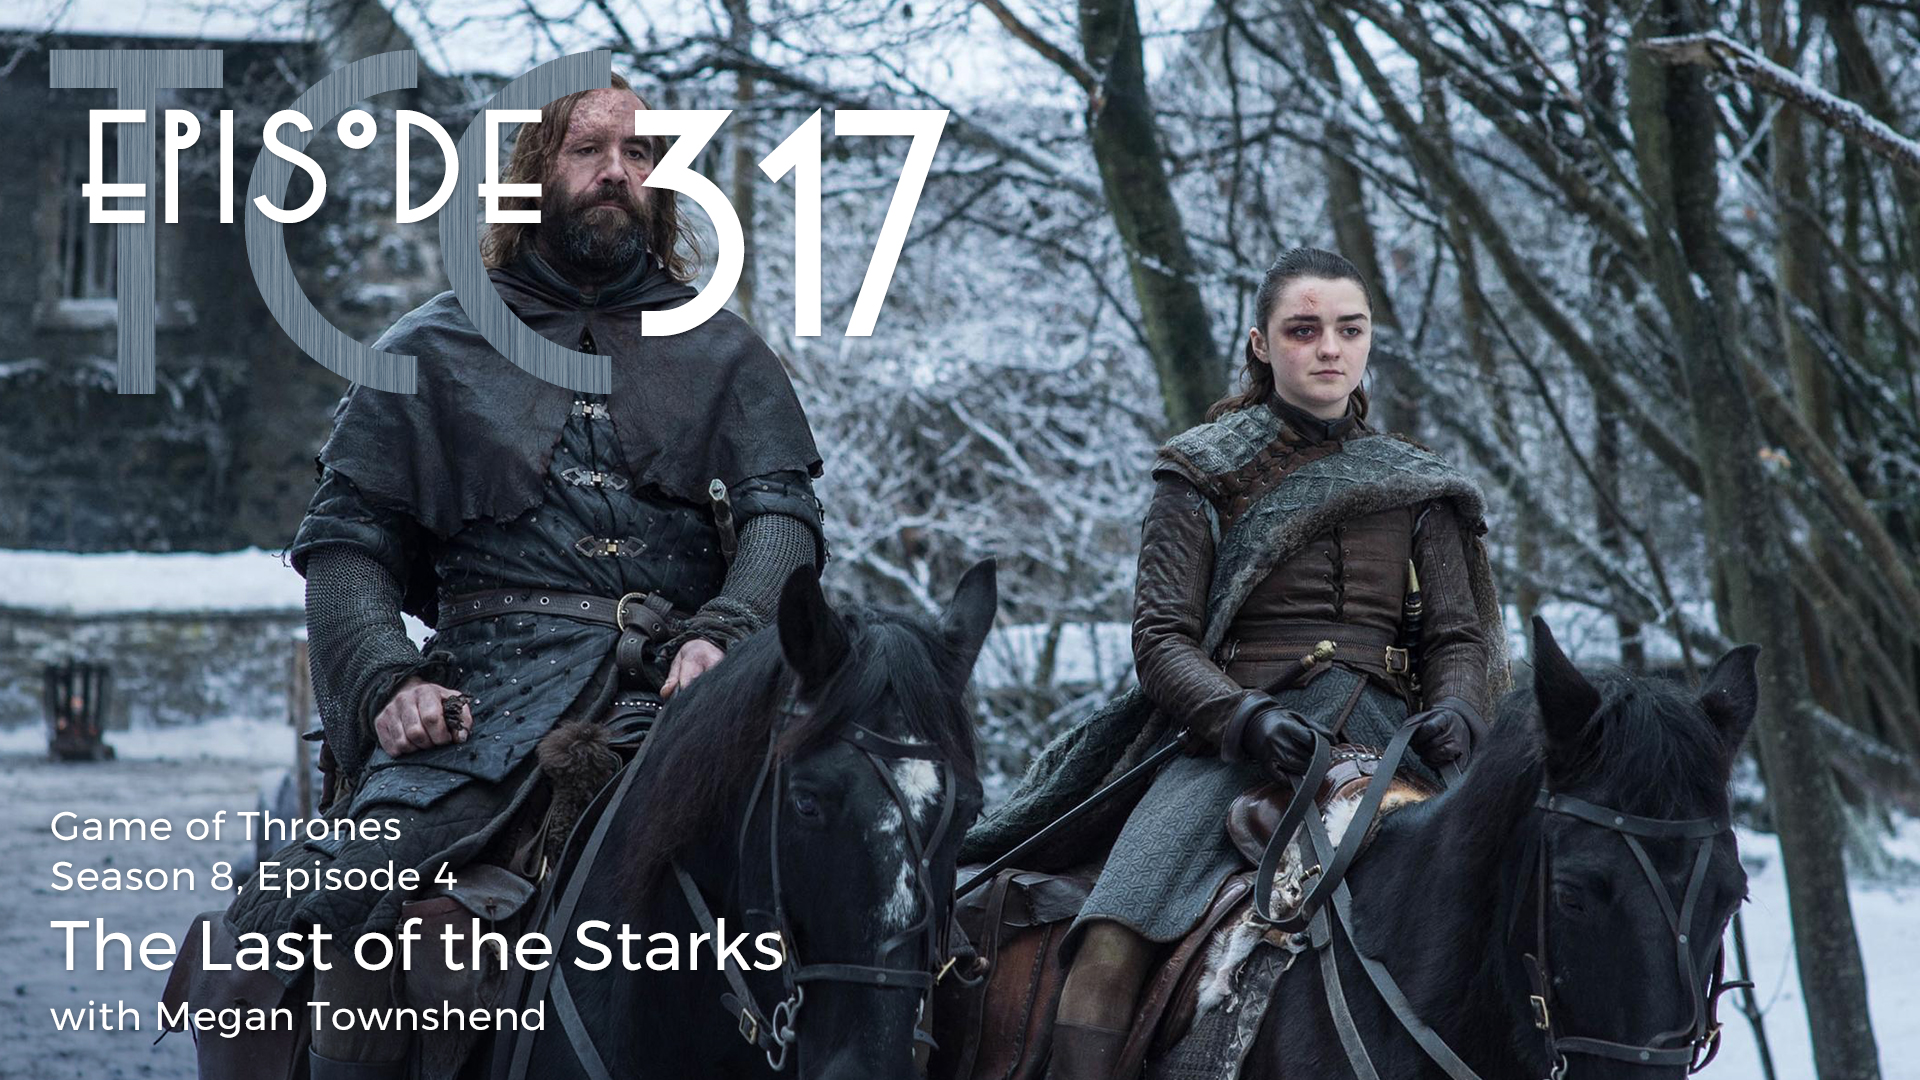 The Citadel Cafe 317: The Last of the Starks